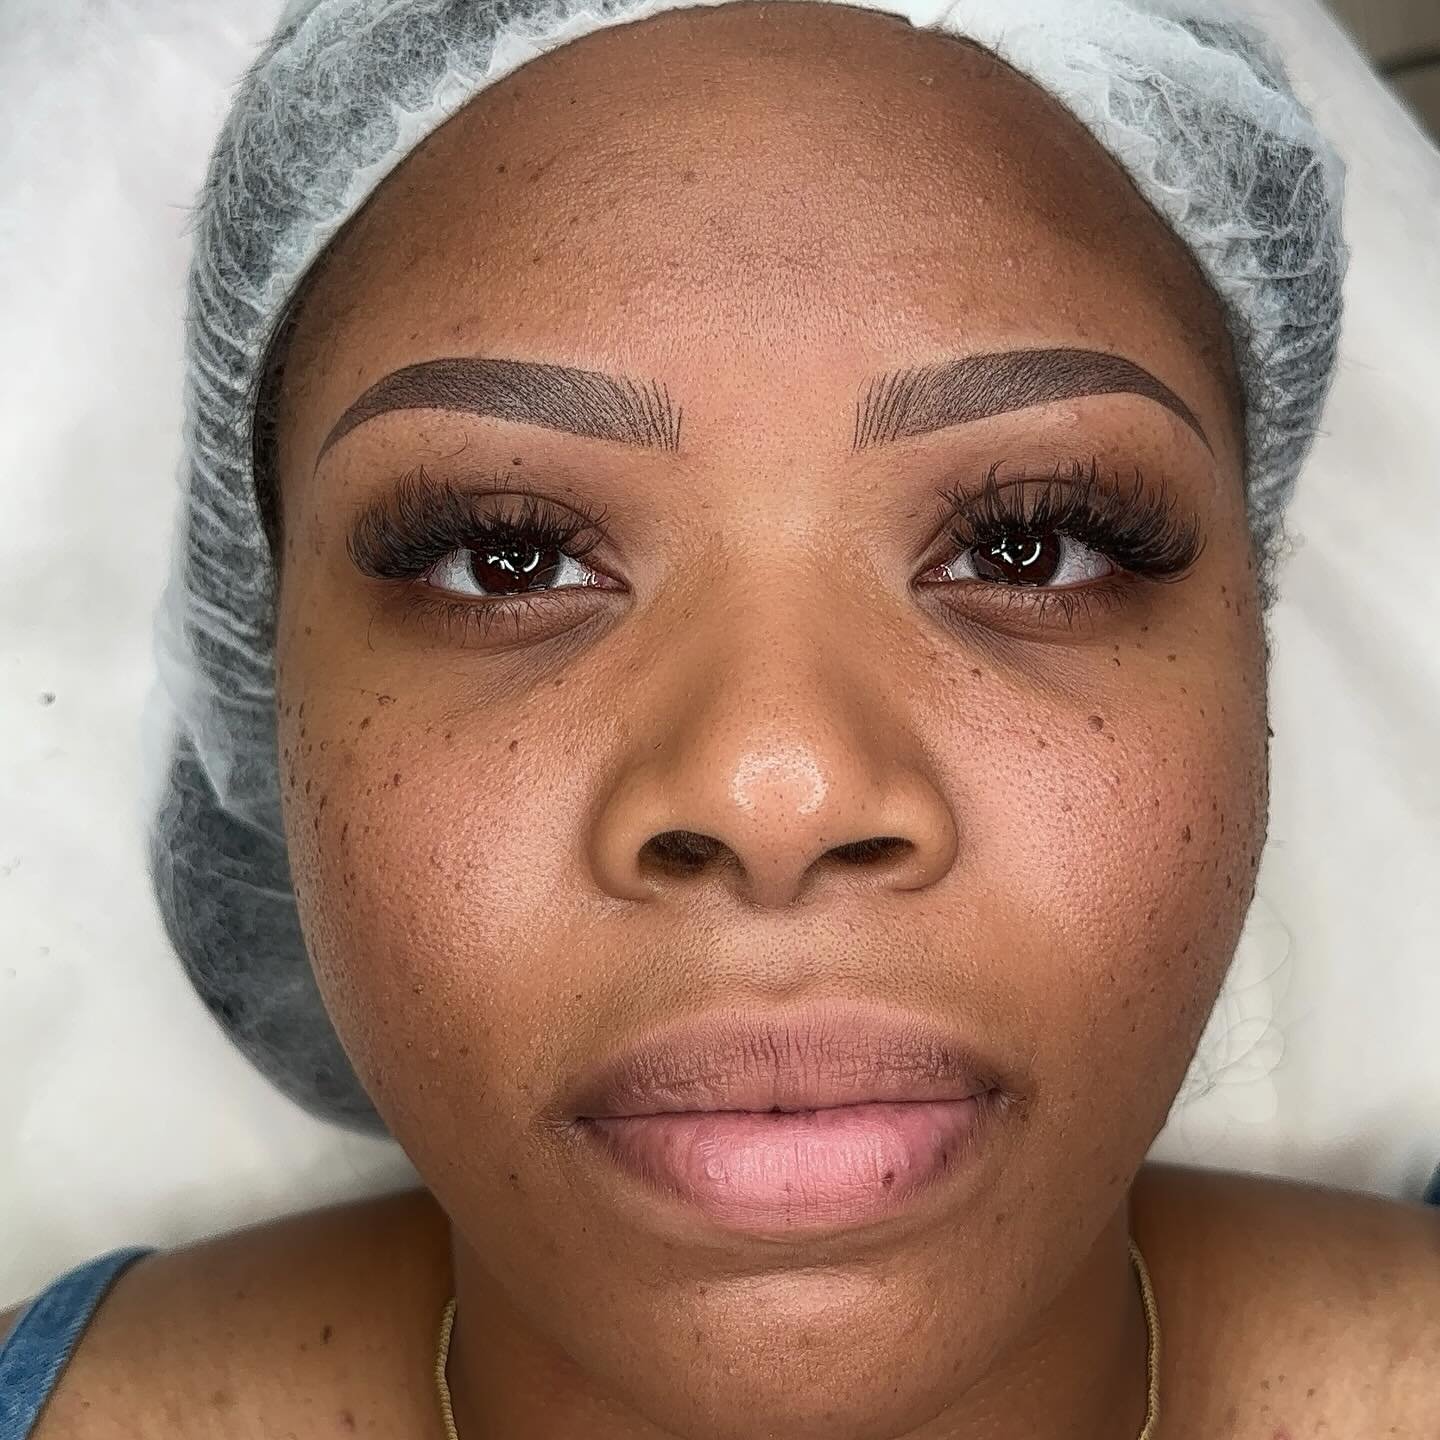 Cut your makeup routine in half with combination brows. This technique is great for brows with sparse to no hairs 
&bull;
&bull;
&bull;
&bull;
&bull;
&bull;
#atlantamicroblading #microblading #ombrepowderbrows #nanostrokes #nanostrokesatlanta #ombrep